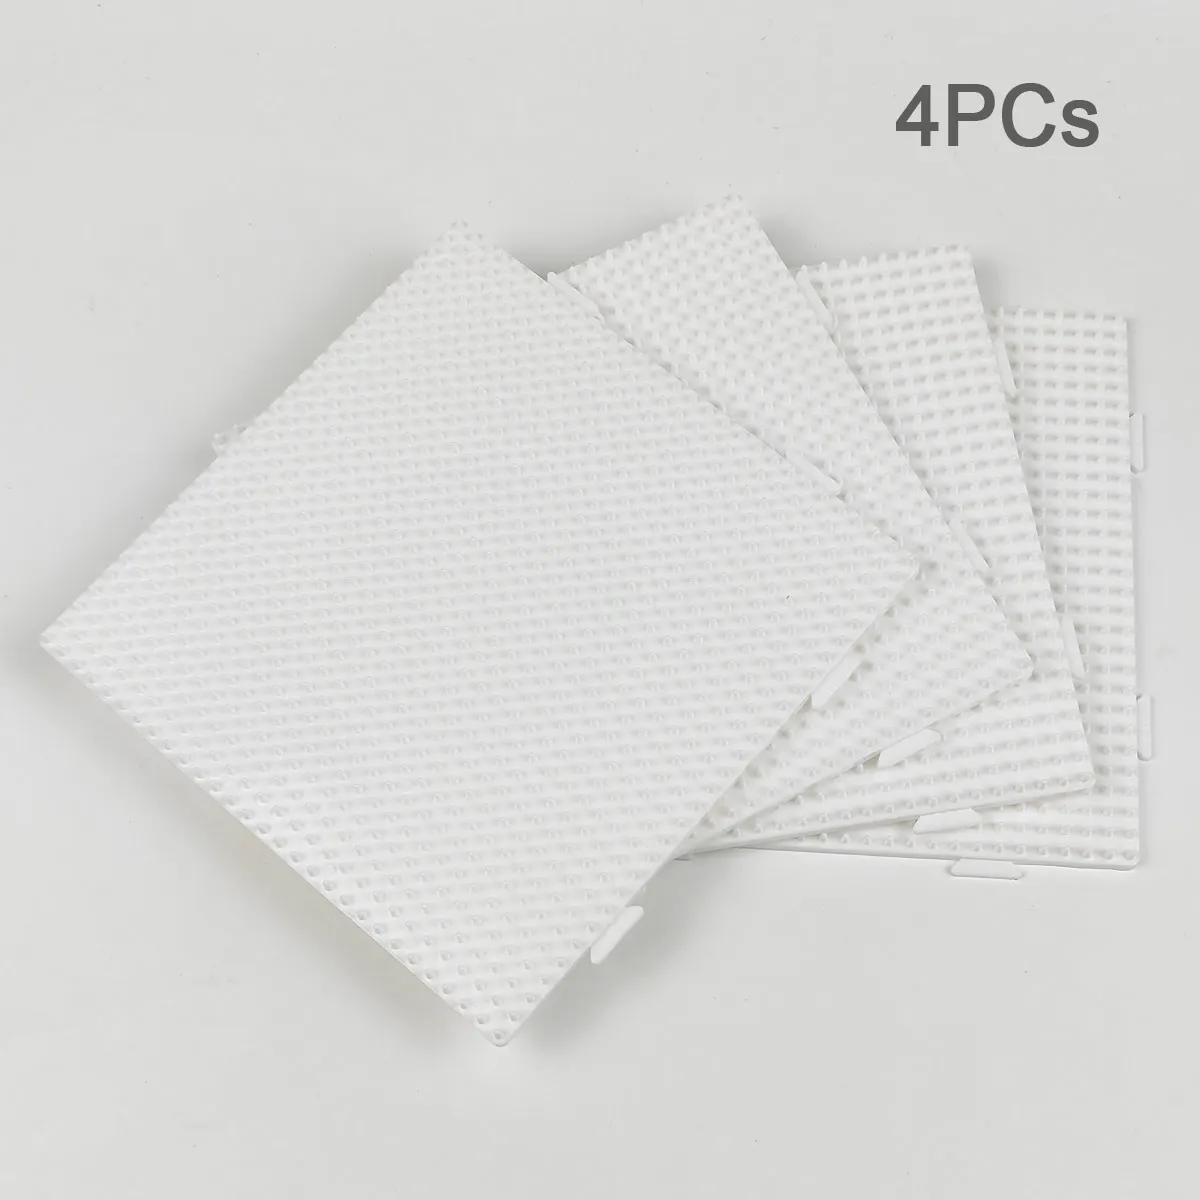 Perler Fused Bead Pegboard - Clear Squares, Large, Set of 4